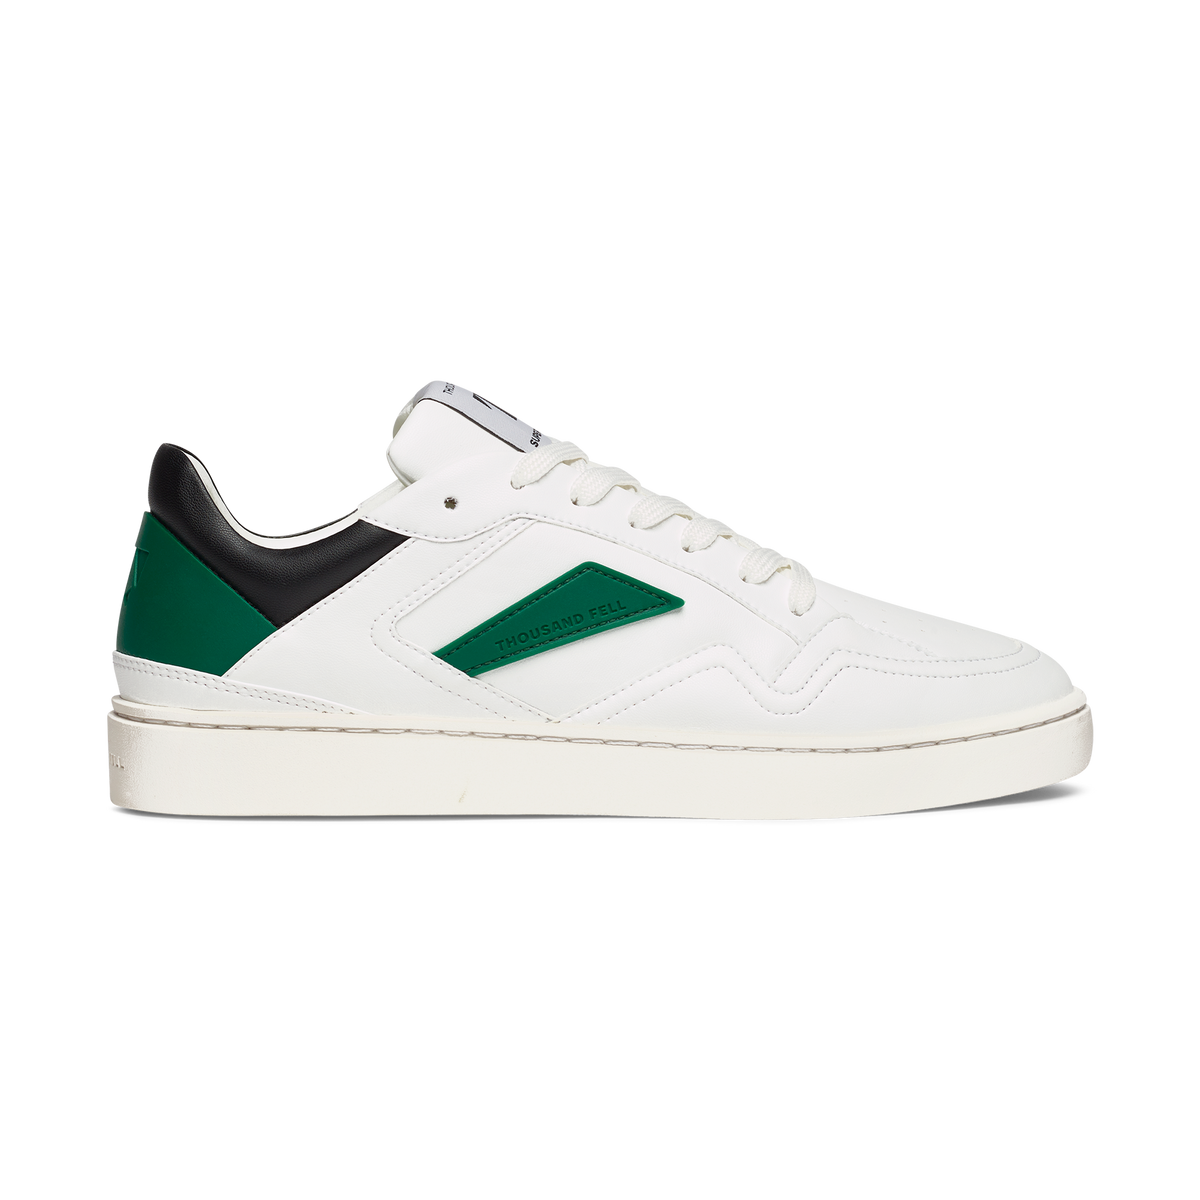 sustainable vegan sneaker with white upper and black and green details